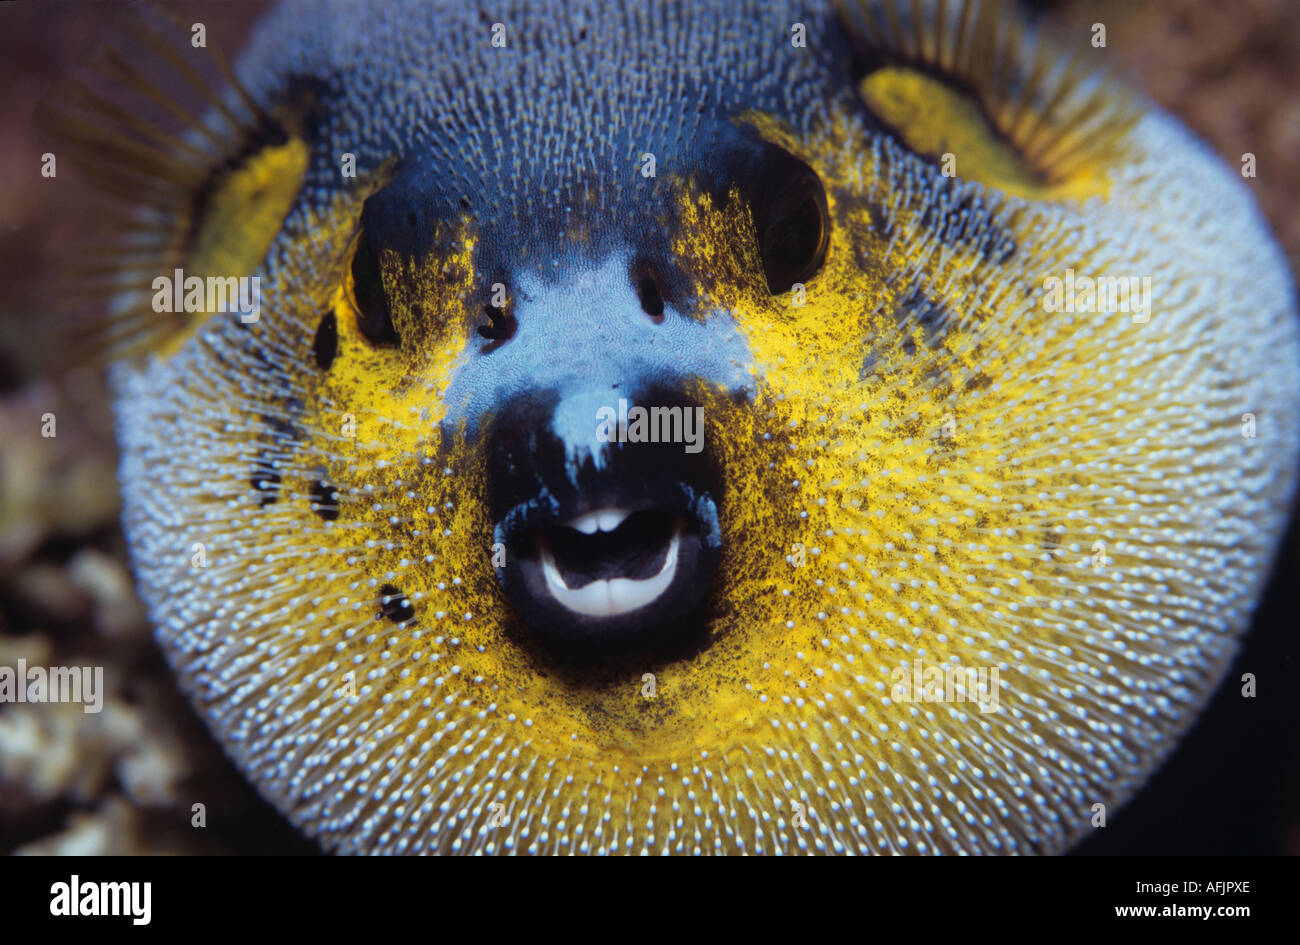 FACE OF BLACKSPOTTED PUFFERFISH Stock Photo